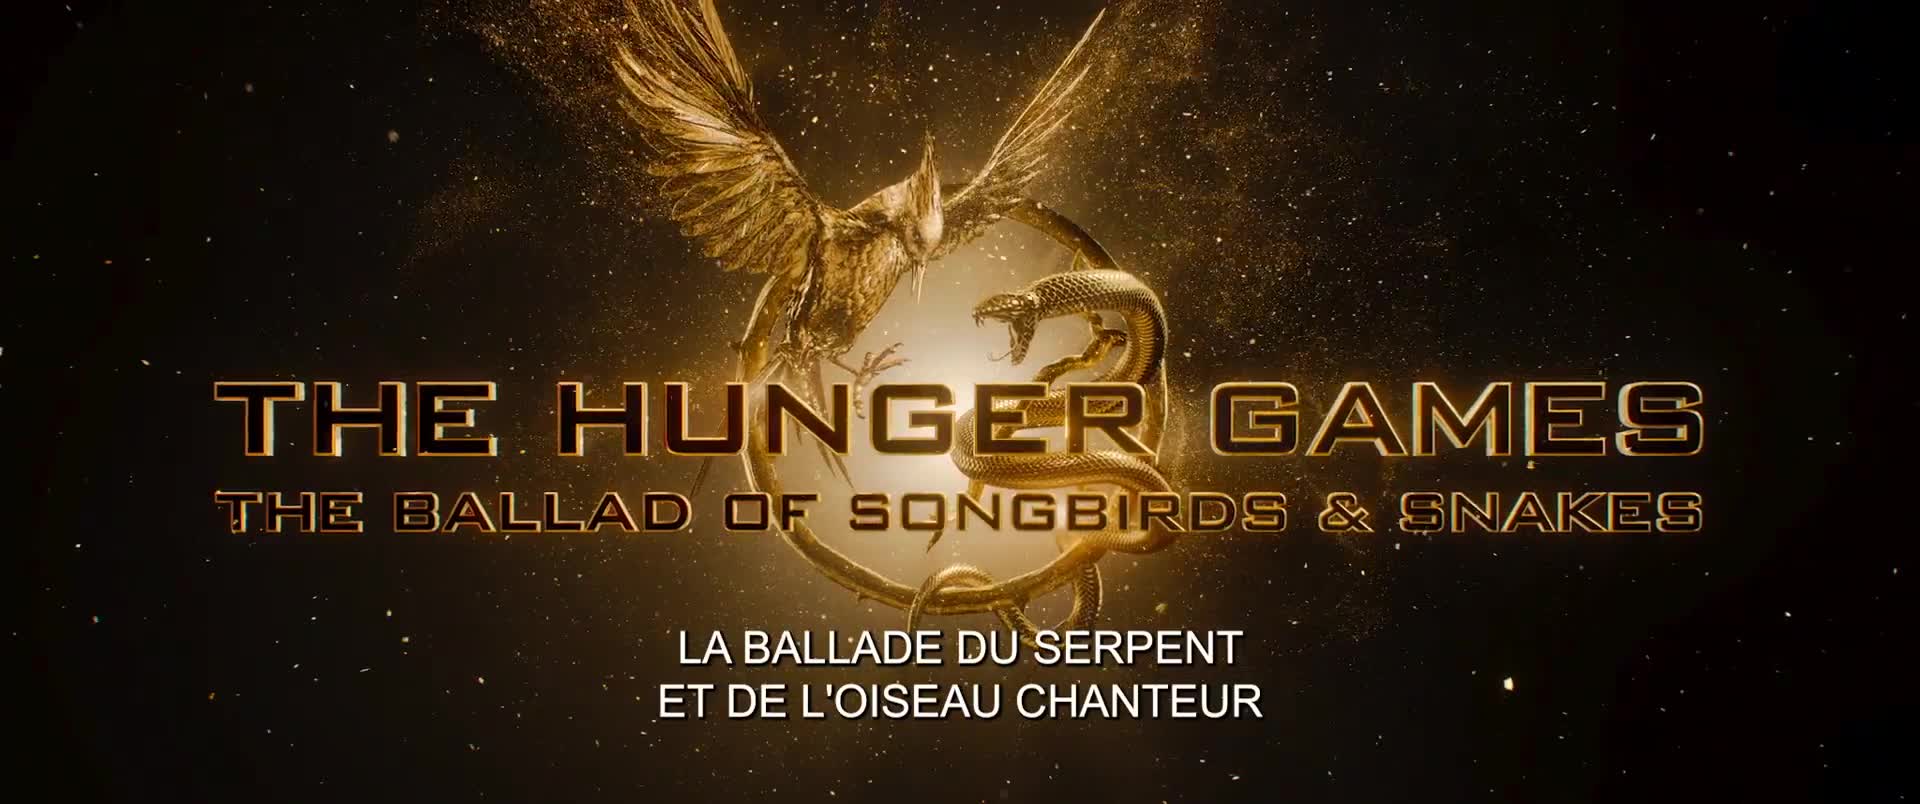 Movie The Hunger Games: The Ballad of Songbirds & Snakes - Cineman